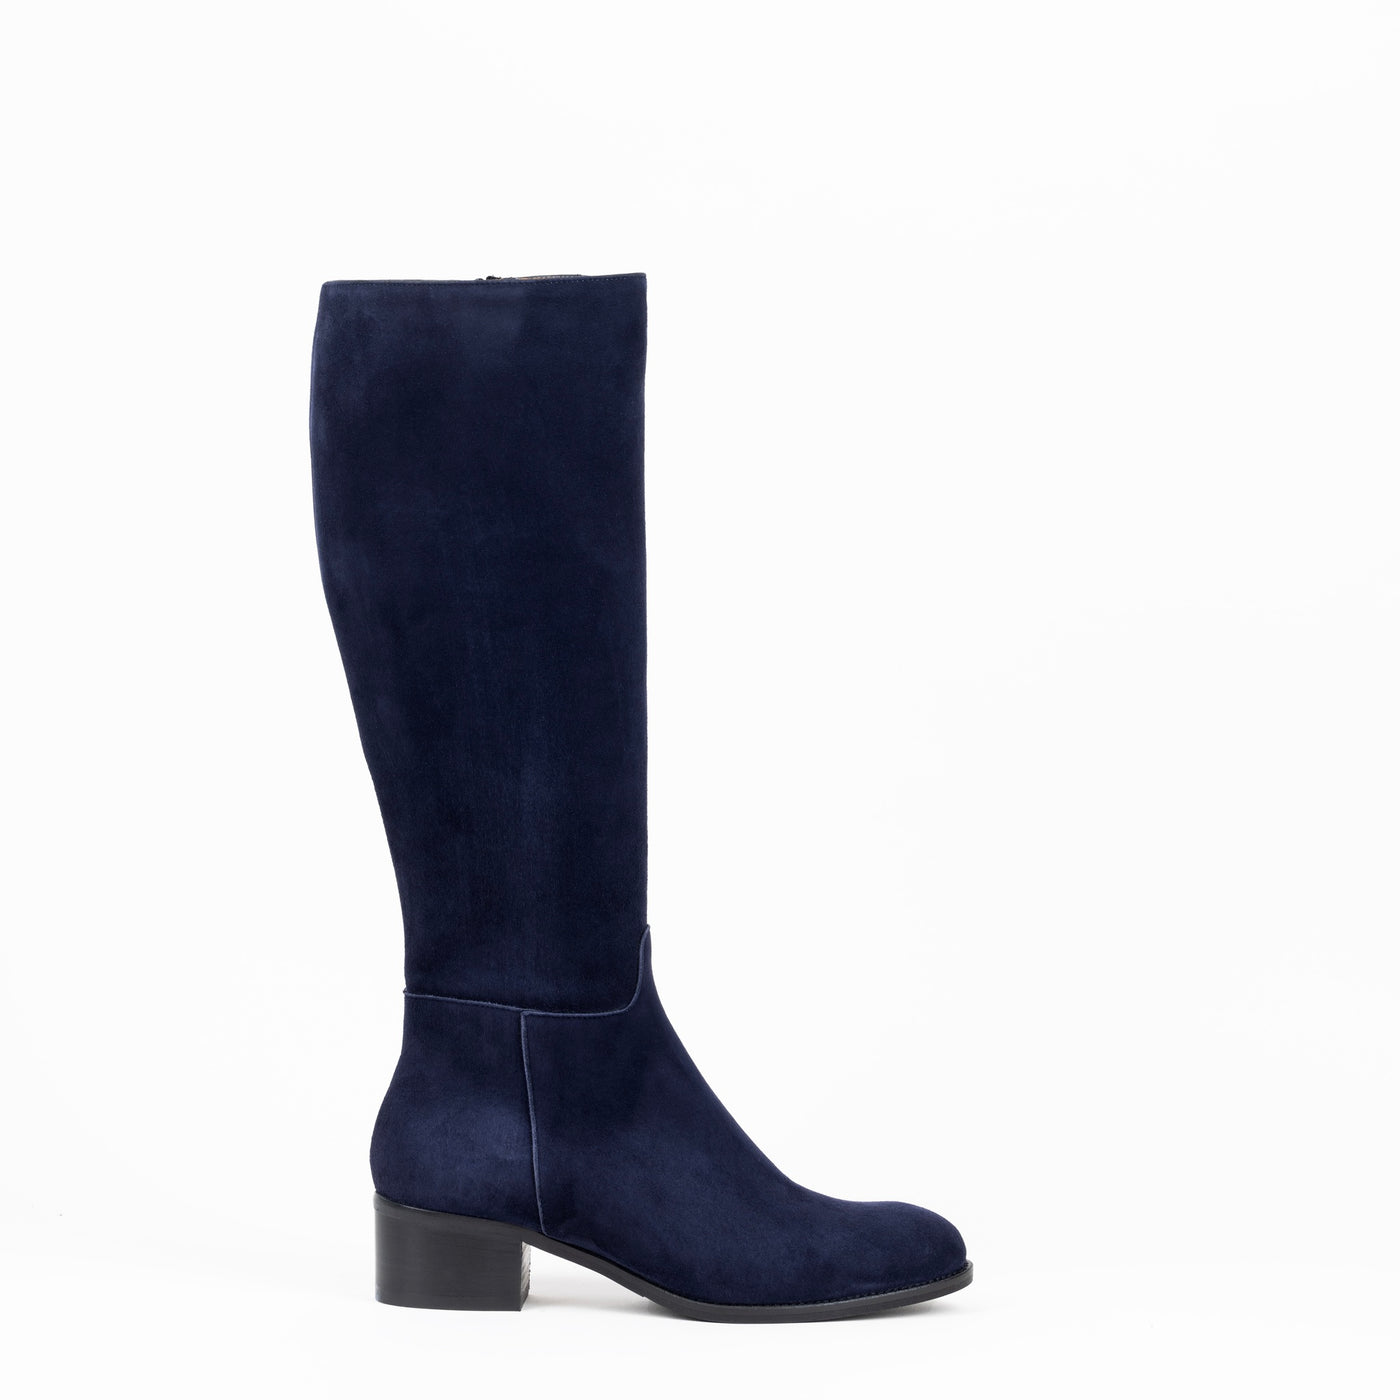 Navy suede riding boots